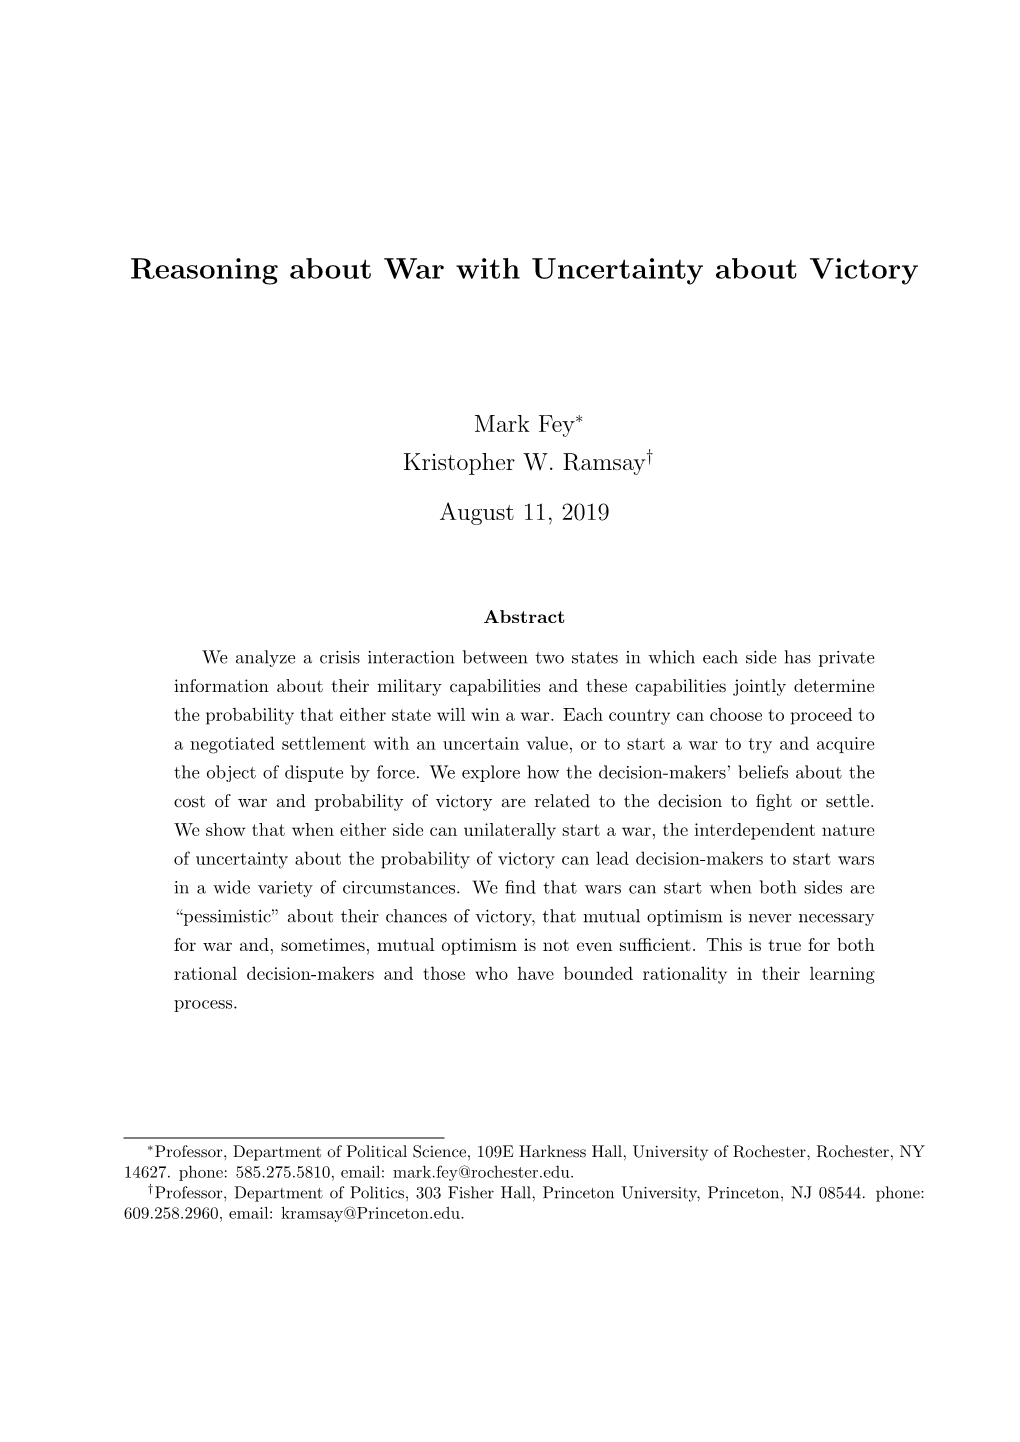 Reasoning About War with Uncertainty About Victory